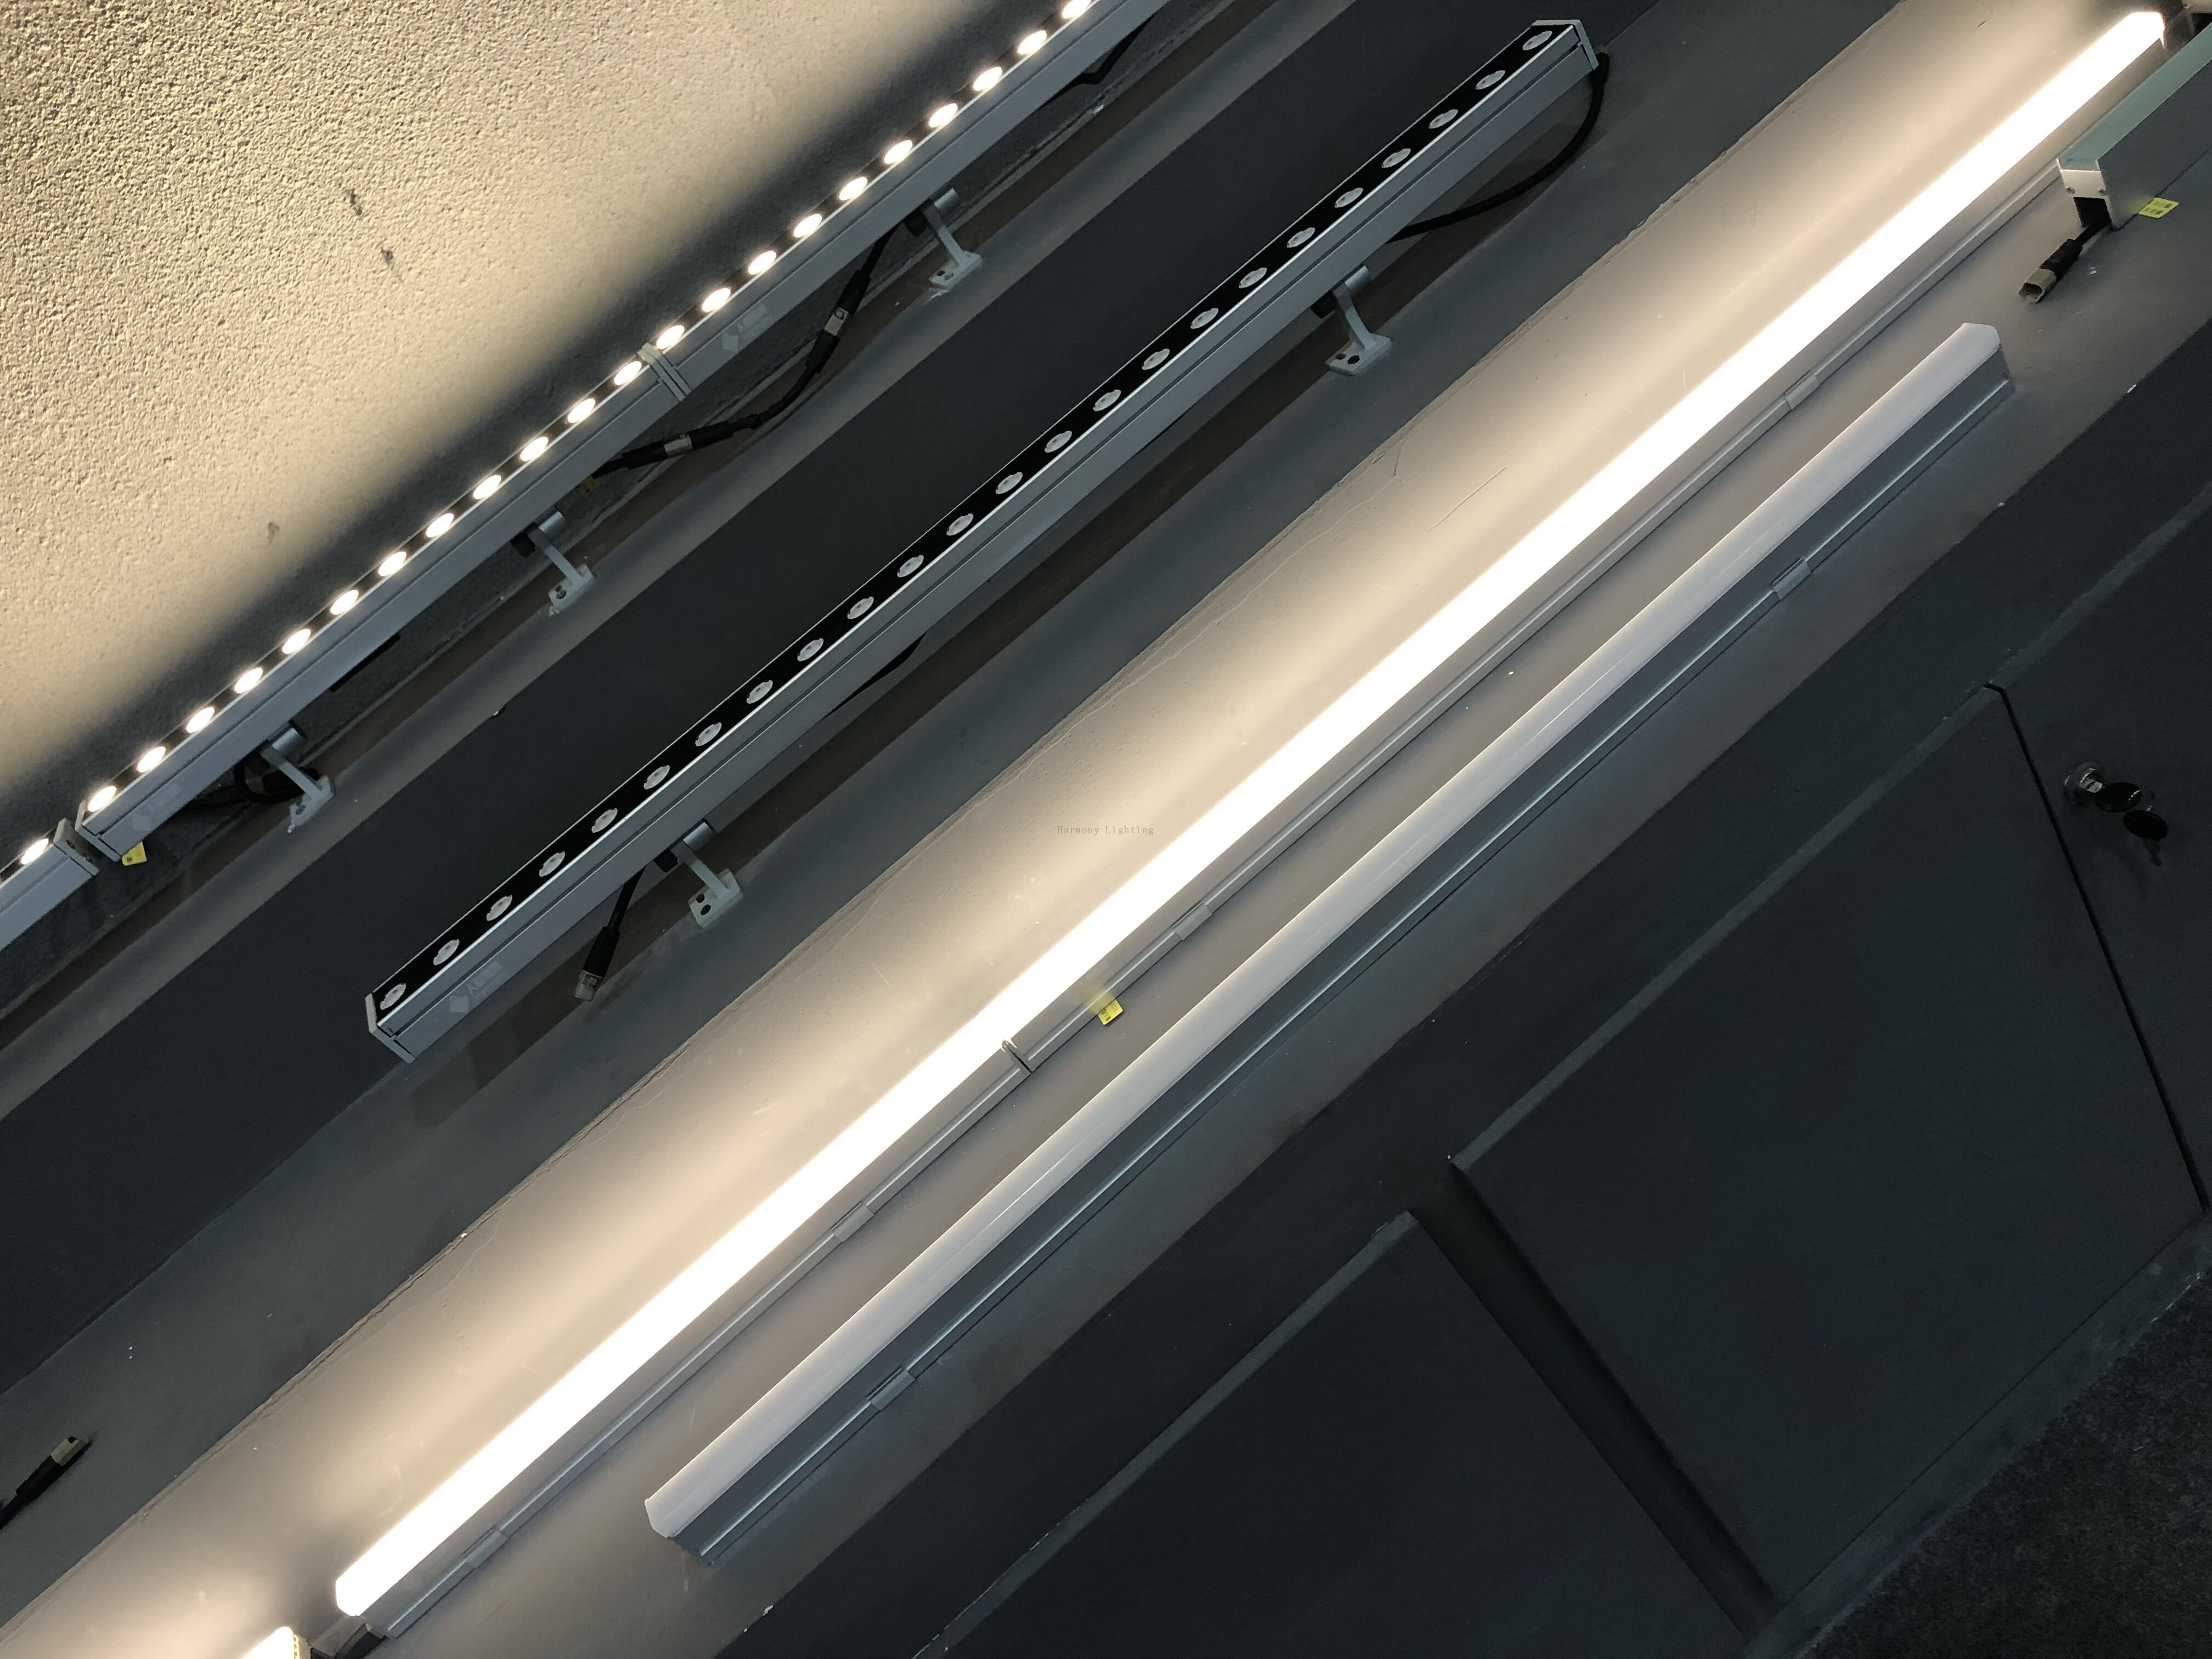 RH-C26 12W High Quality Connectable Aluminum Outdoor IP65 Waterproof 24W LED Linear Strip Lighting light